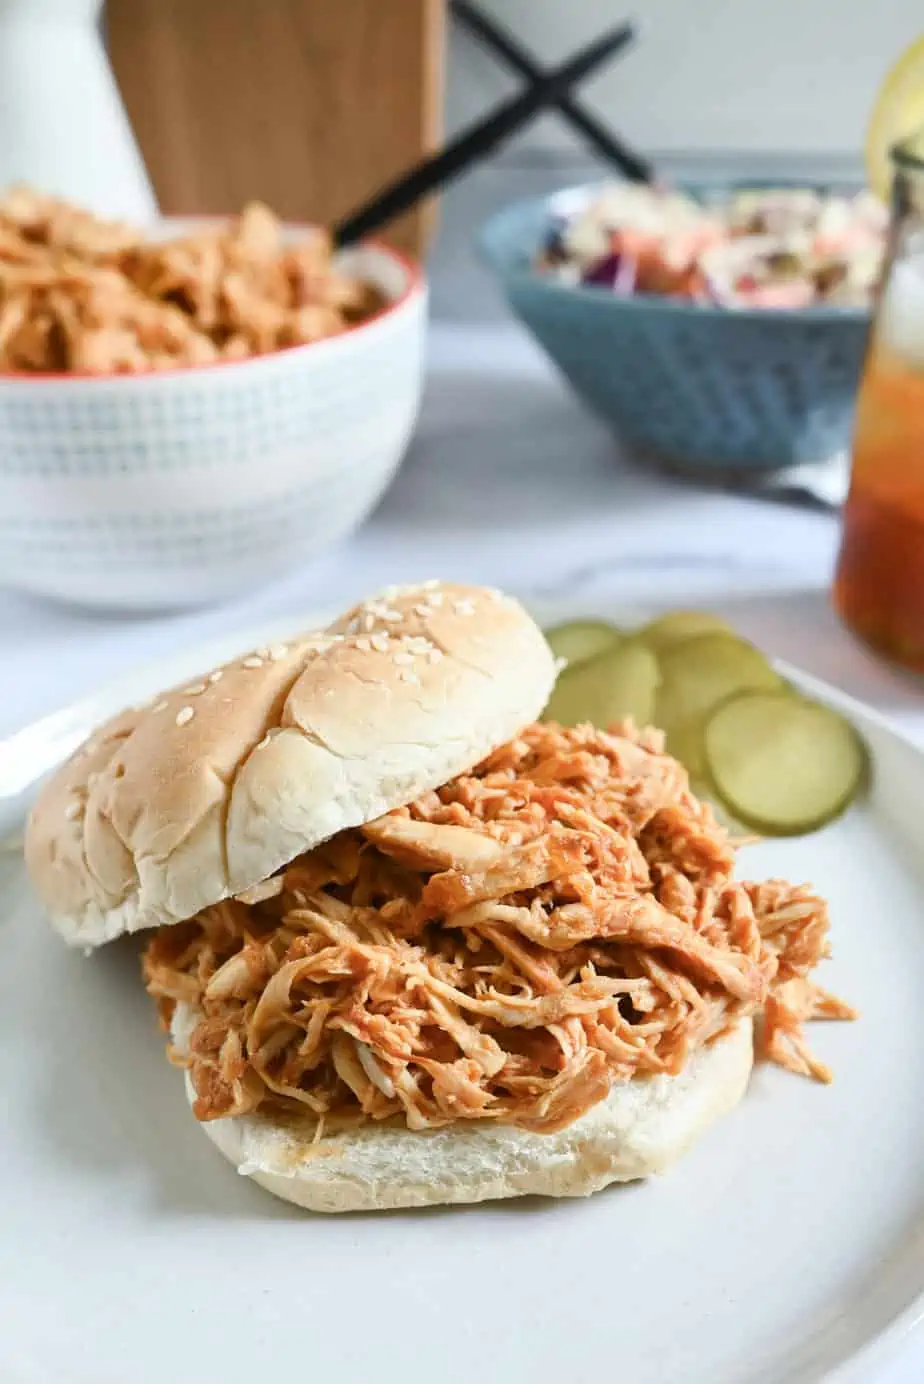 Crockpot pulled chicken on a sesame bun, set next to pickles on a white plate.